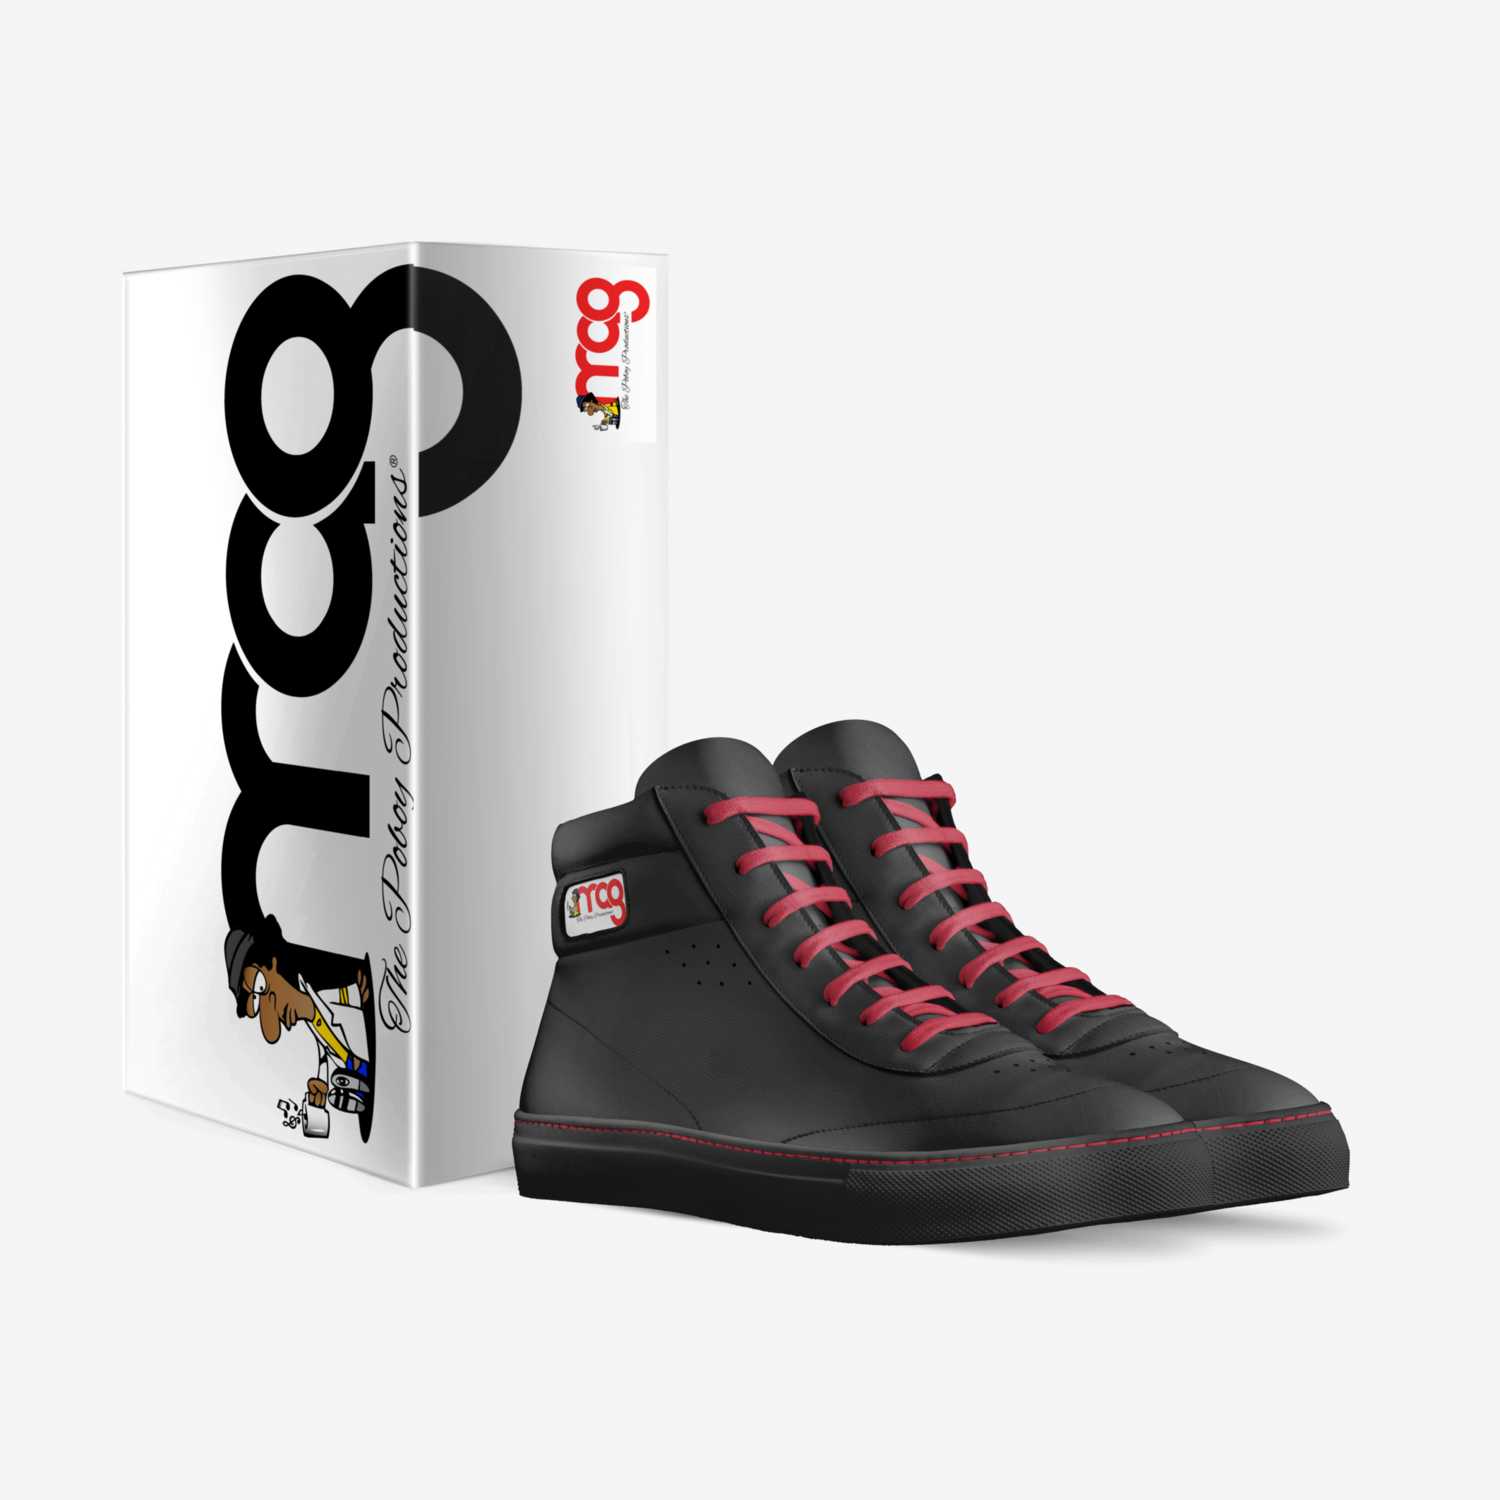 D-boyz custom made in Italy shoes by Marcus Brown | Box view